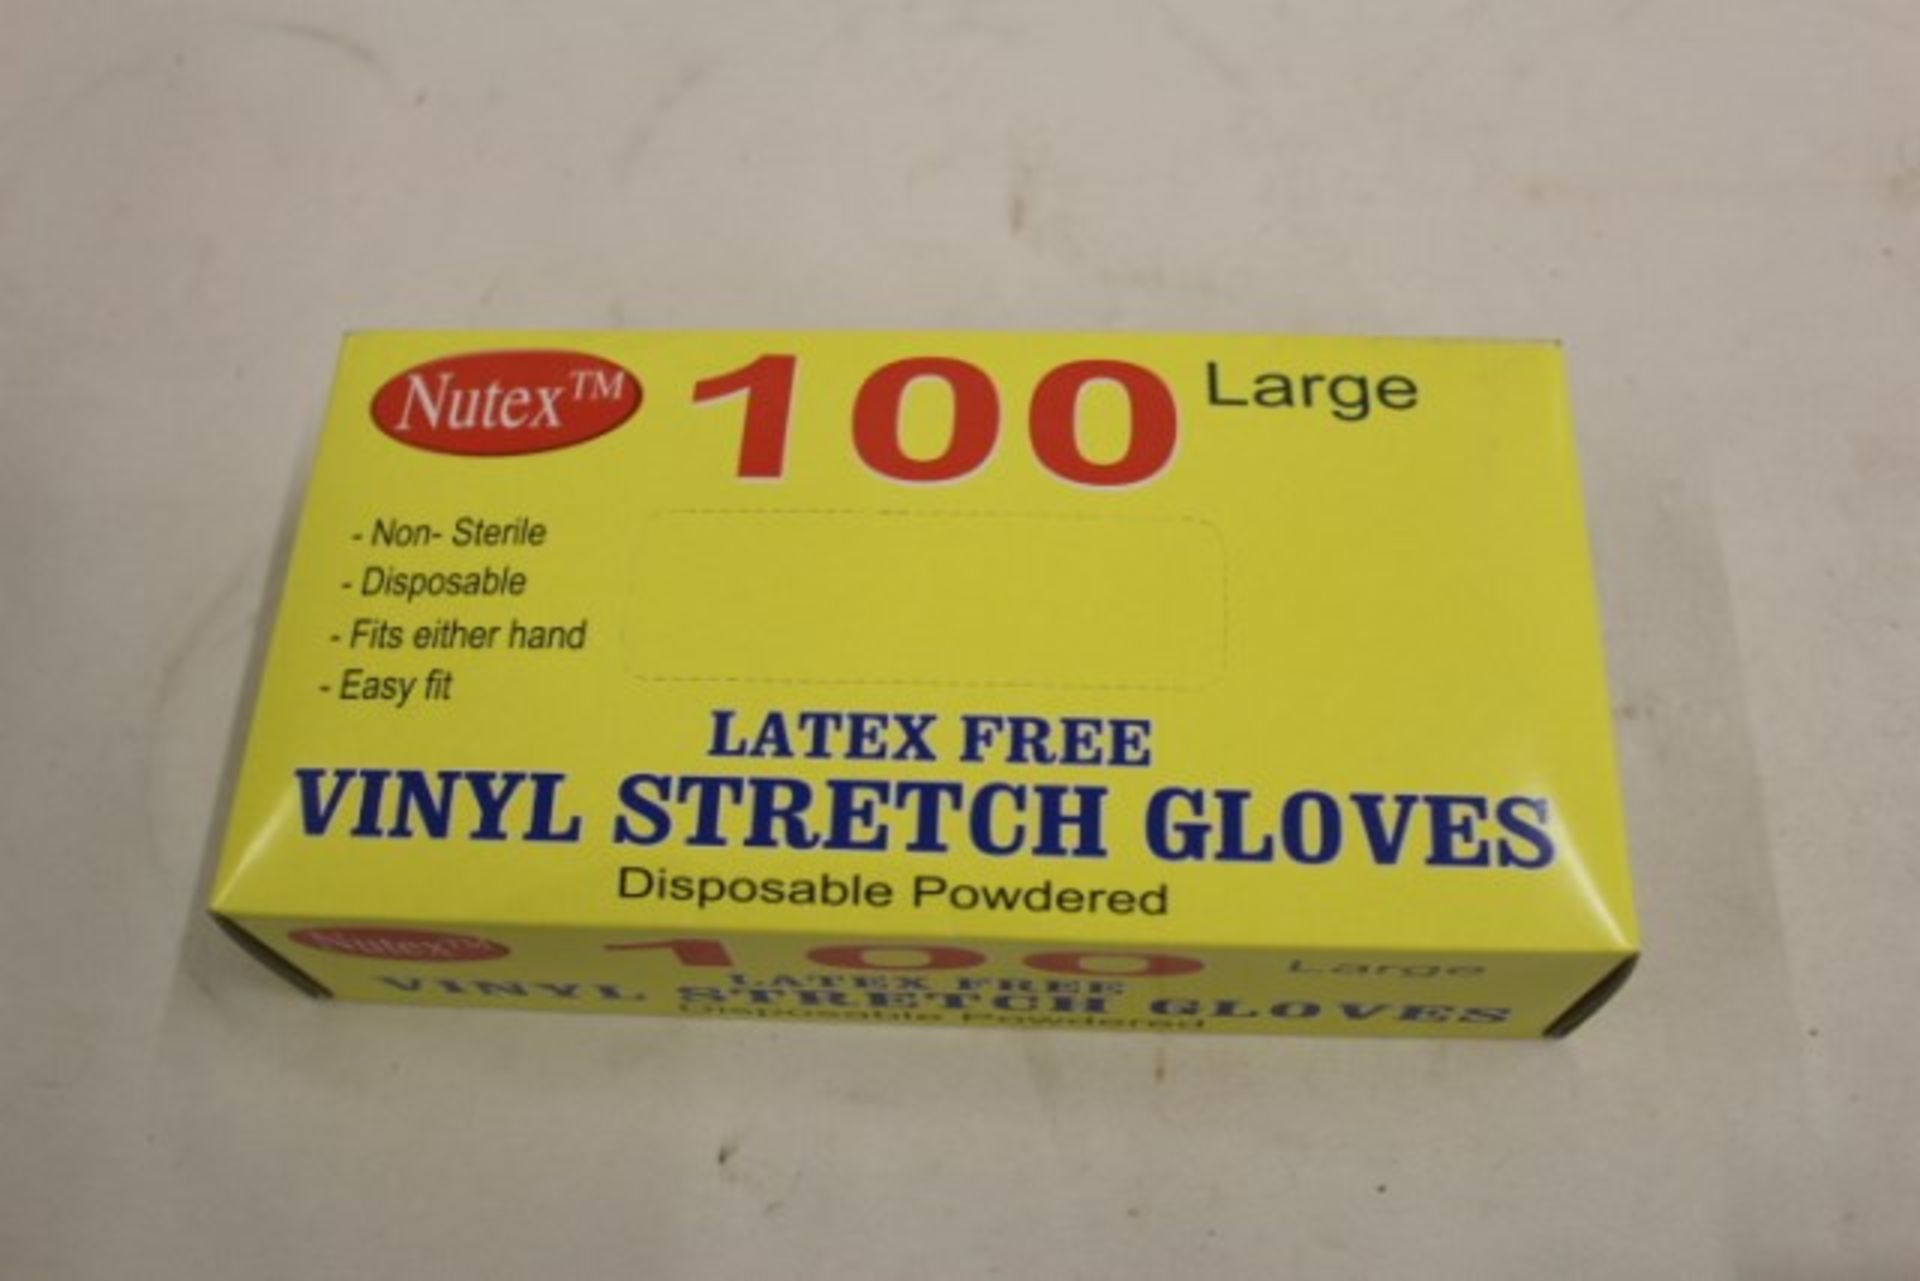 V *TRADE QTY* Brand New 100 Pairs Latex Free Vinyl Stretch Gloves X 5 YOUR BID PRICE TO BE